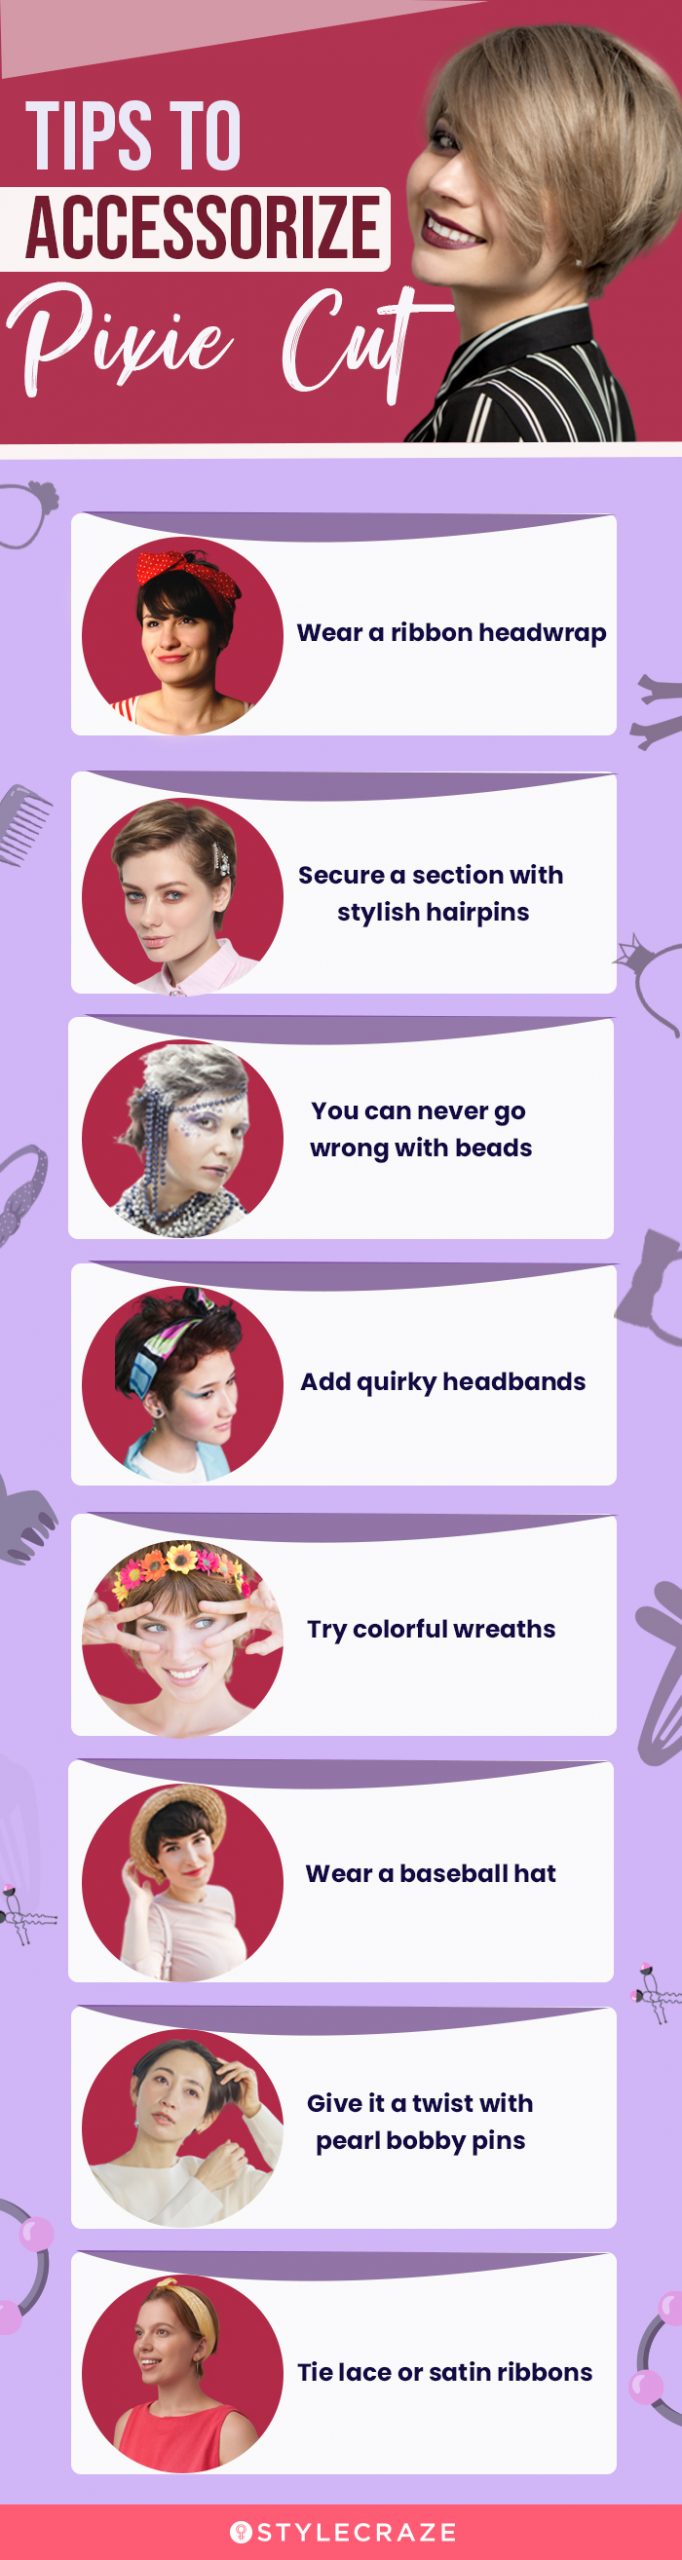 tips to accessorize pixie cut (infographic)